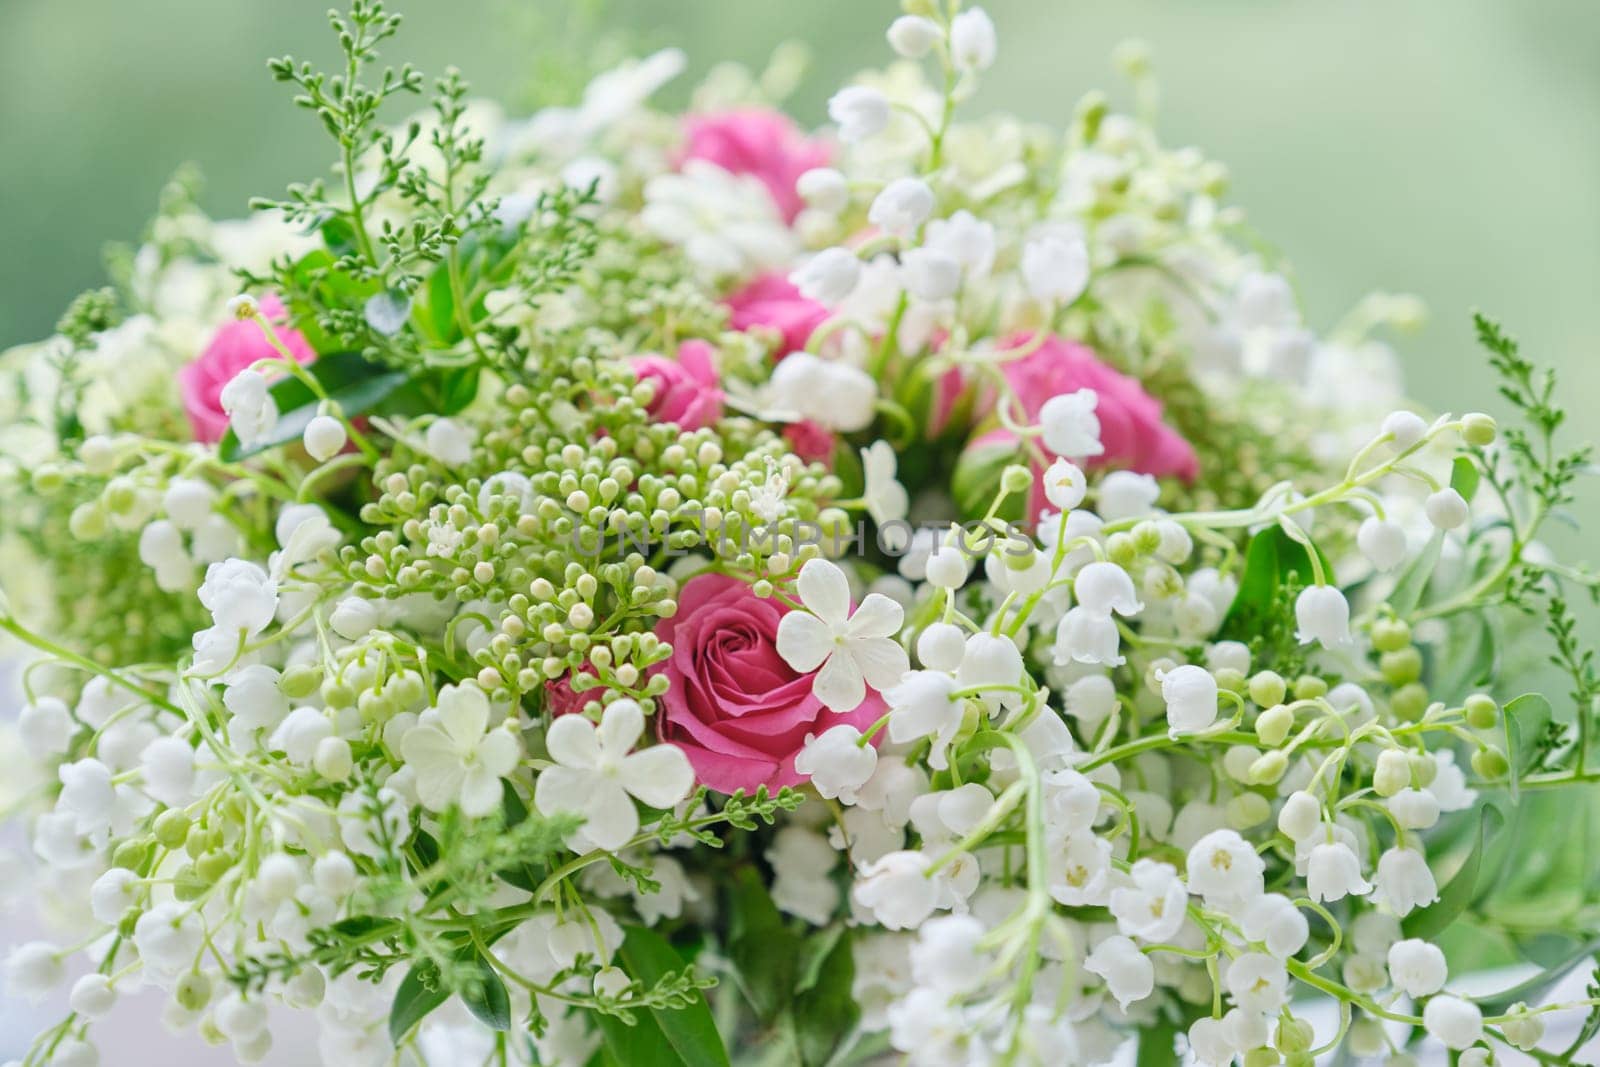 Springtime, spring fresh bouquet of lilies of the valley, pink roses, blooming viburnum. Texture, background